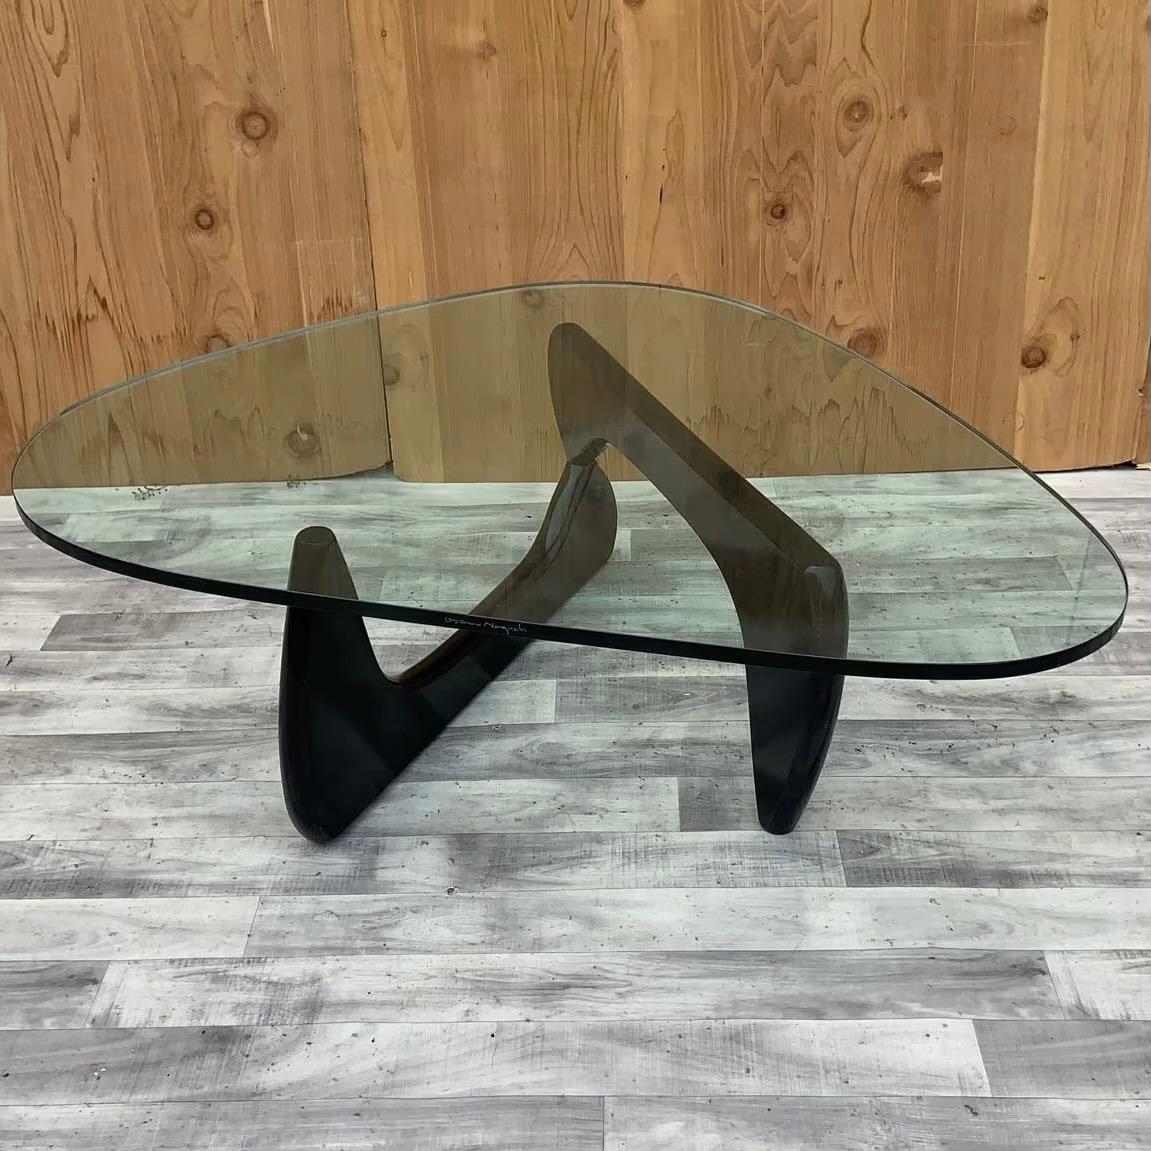 Vintage Mid Century Modern Noguchi Glass Top Coffee Table

This signed Isamu Noguchi Coffee table is a beautiful, simple design consists of only three elements, the glass top and two interlocking wood base pieces. This table was made by the table’s